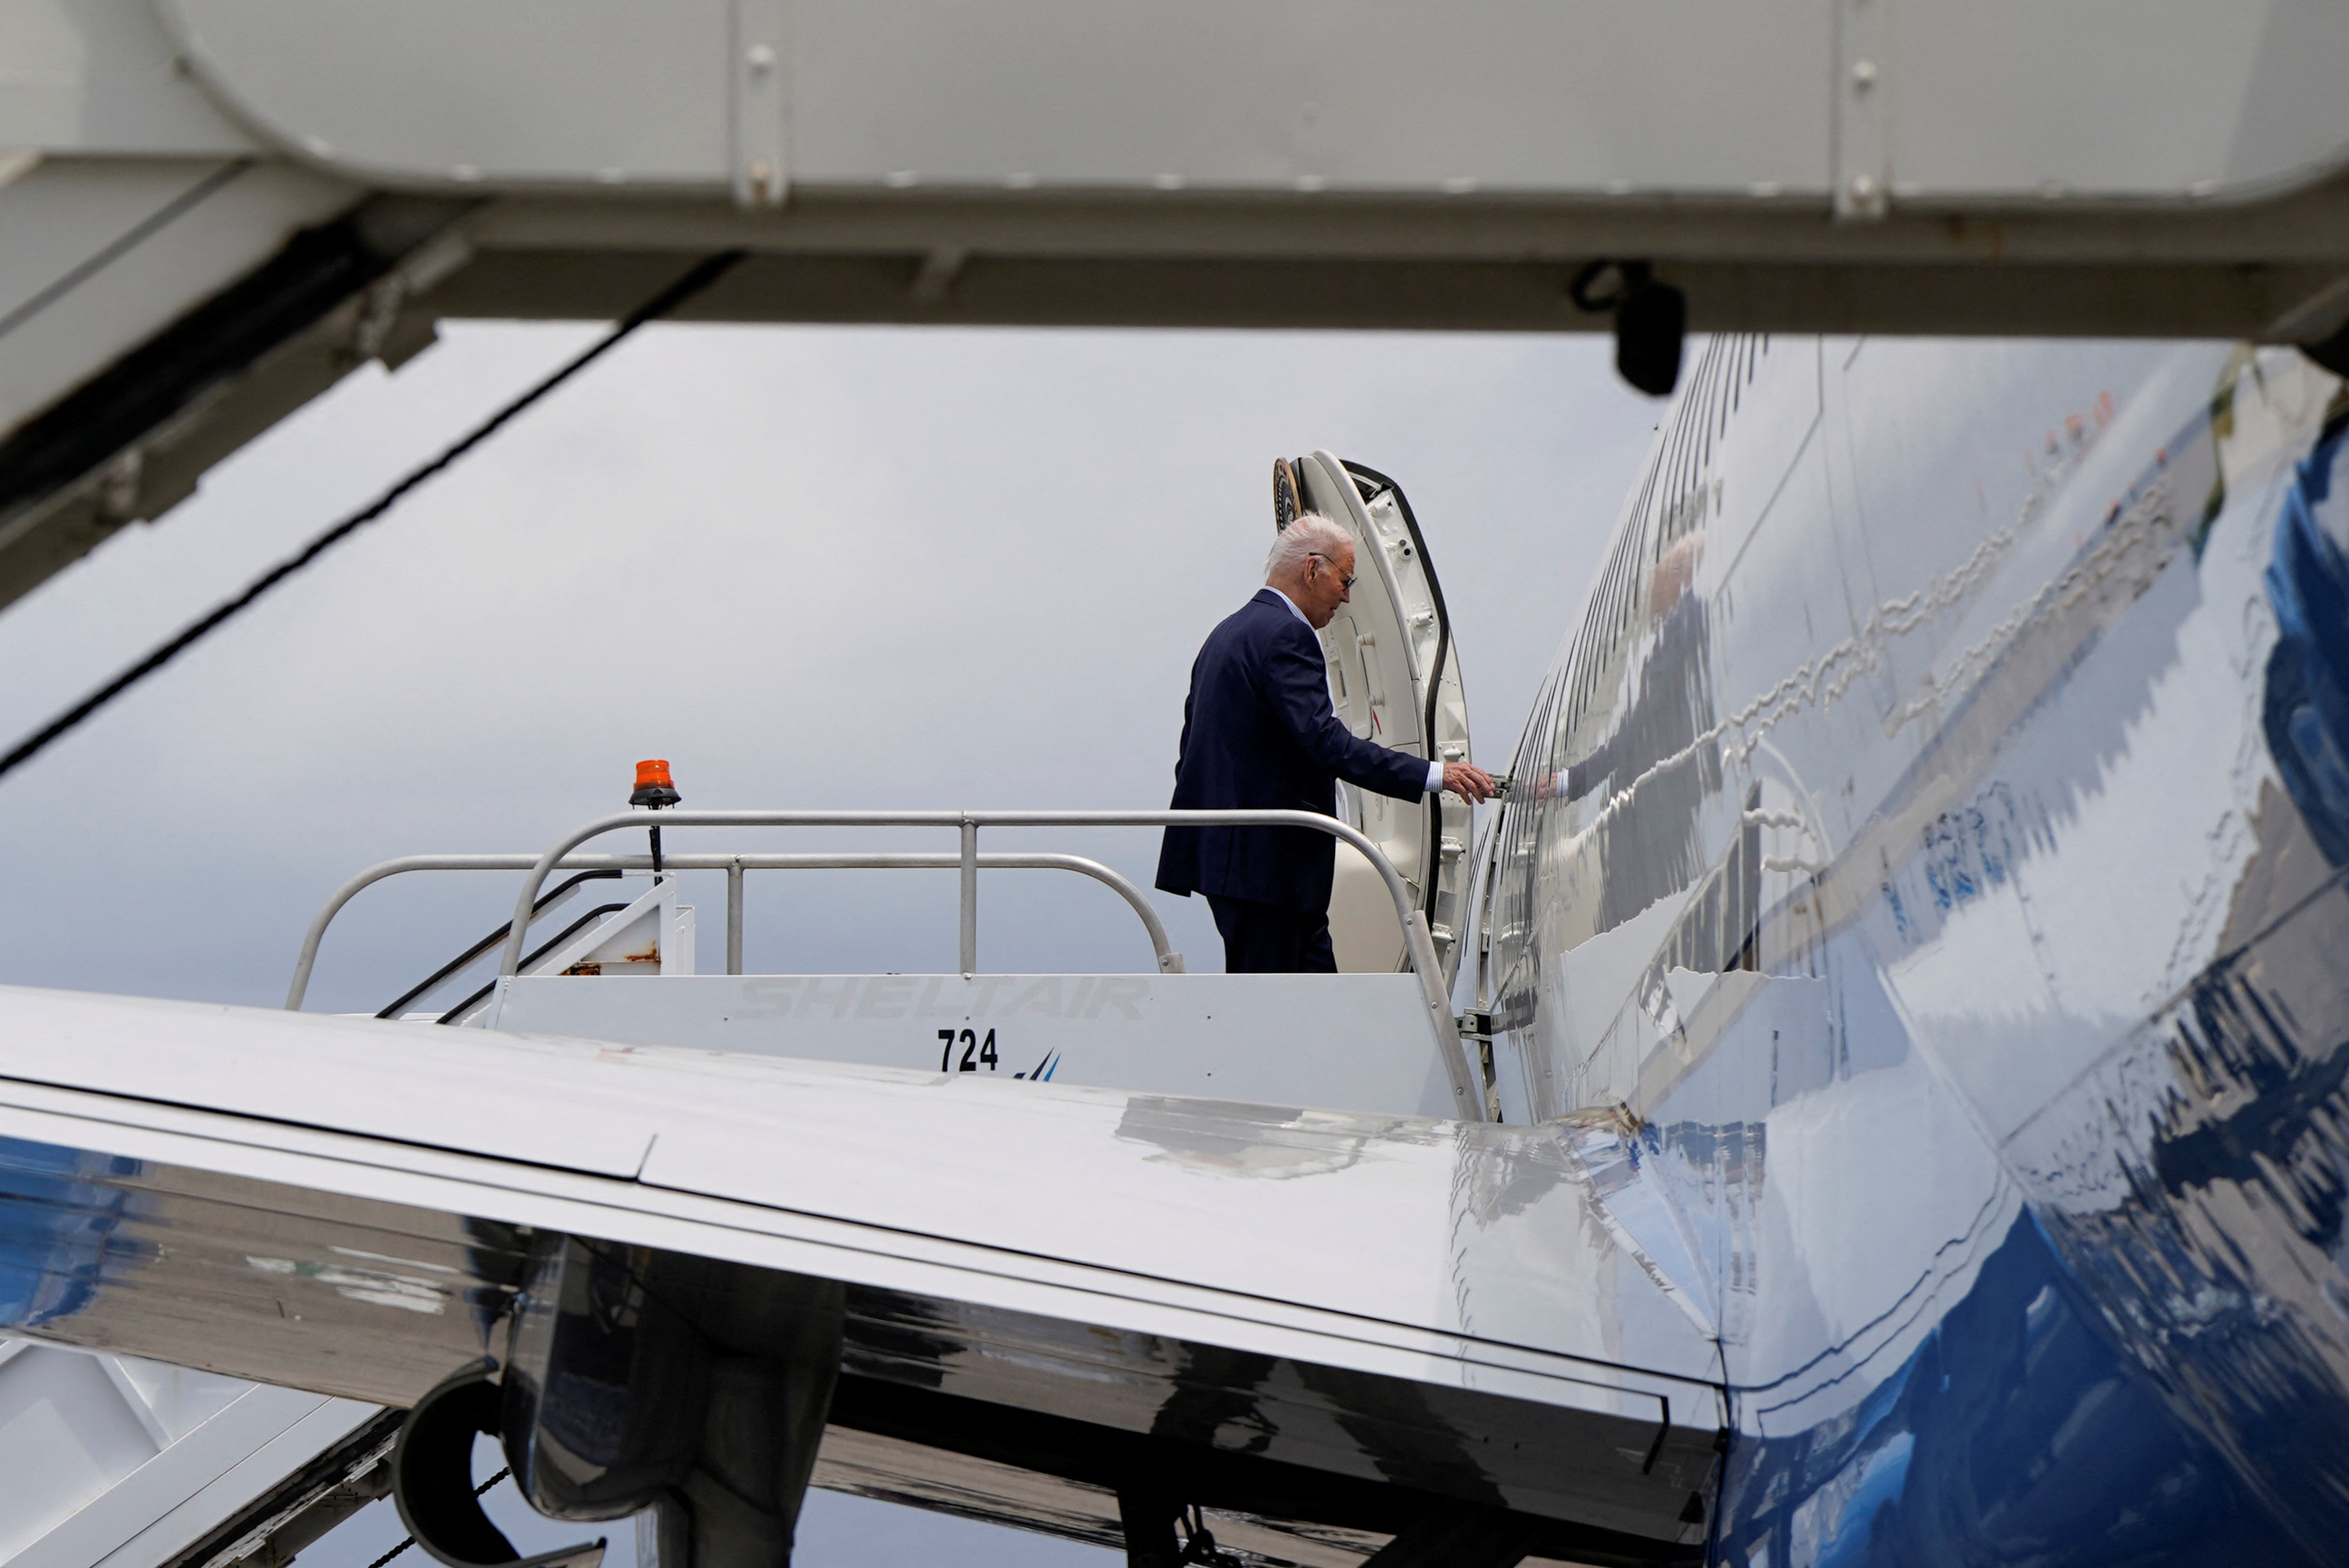 U.S. President Joe Biden boards Air Force One en route to multiple campaign receptions from LaGuardia International Airport in New York